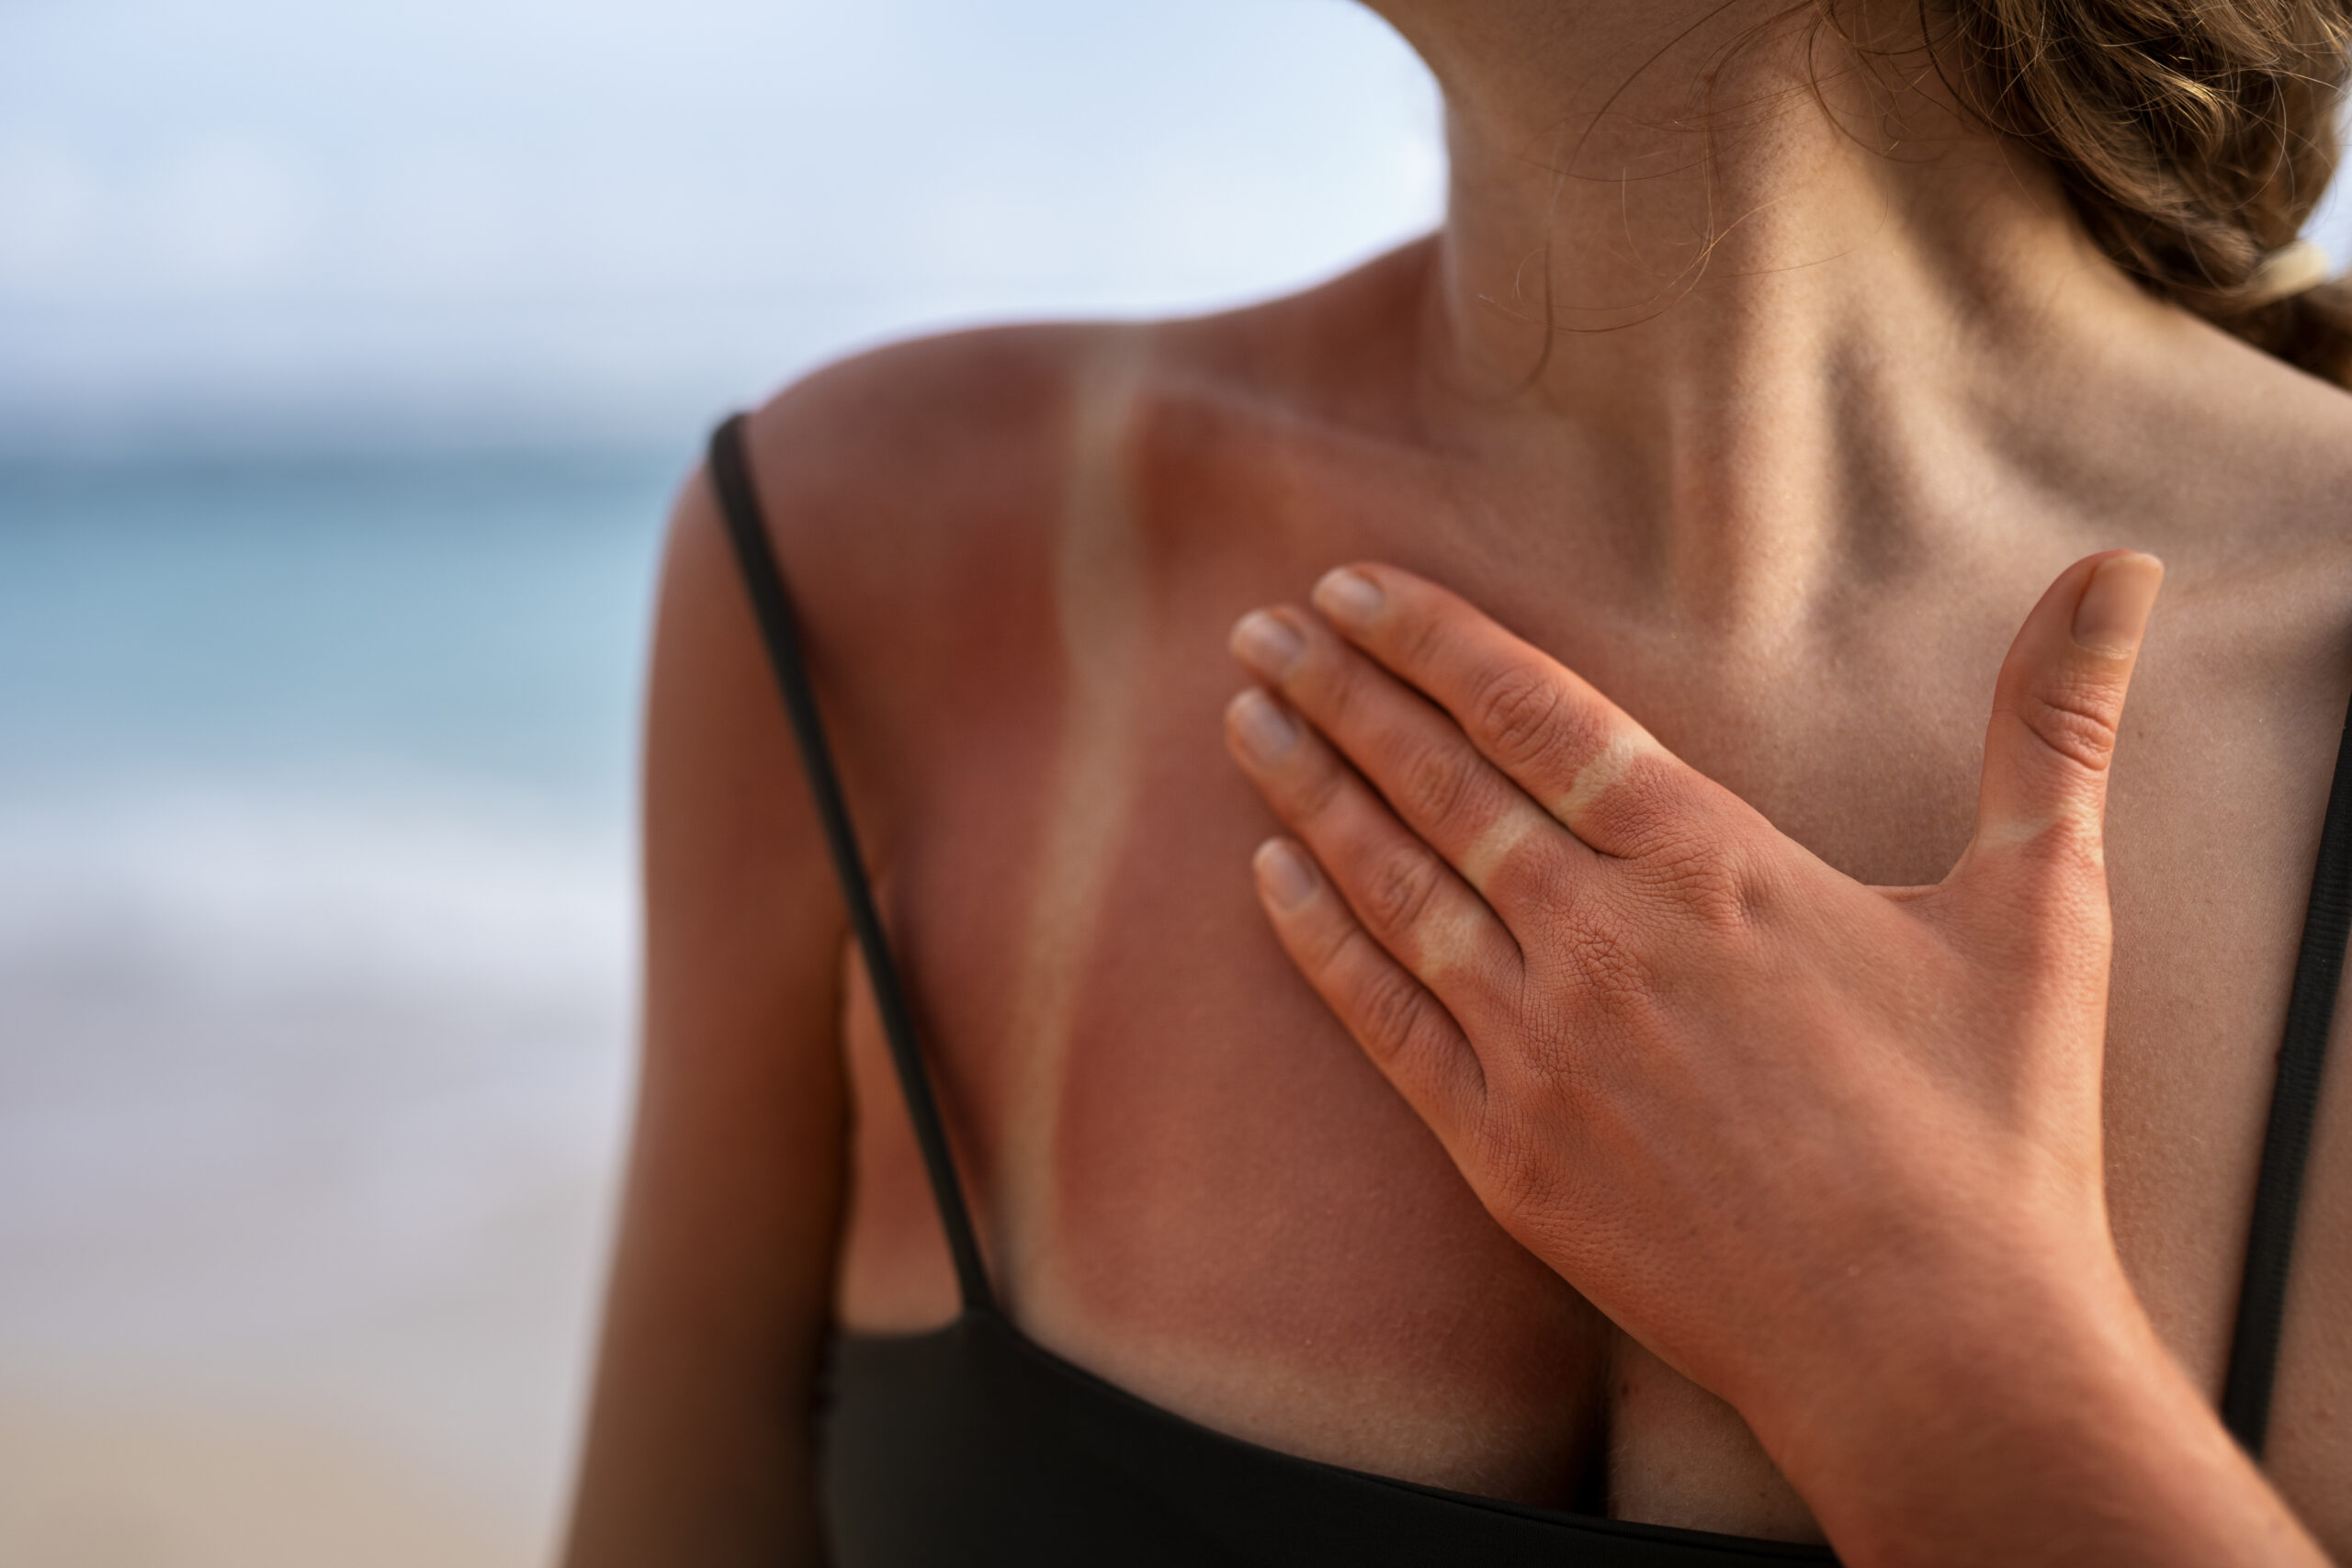 Sunburn: What Is, Symptoms, Degrees, and First Aid